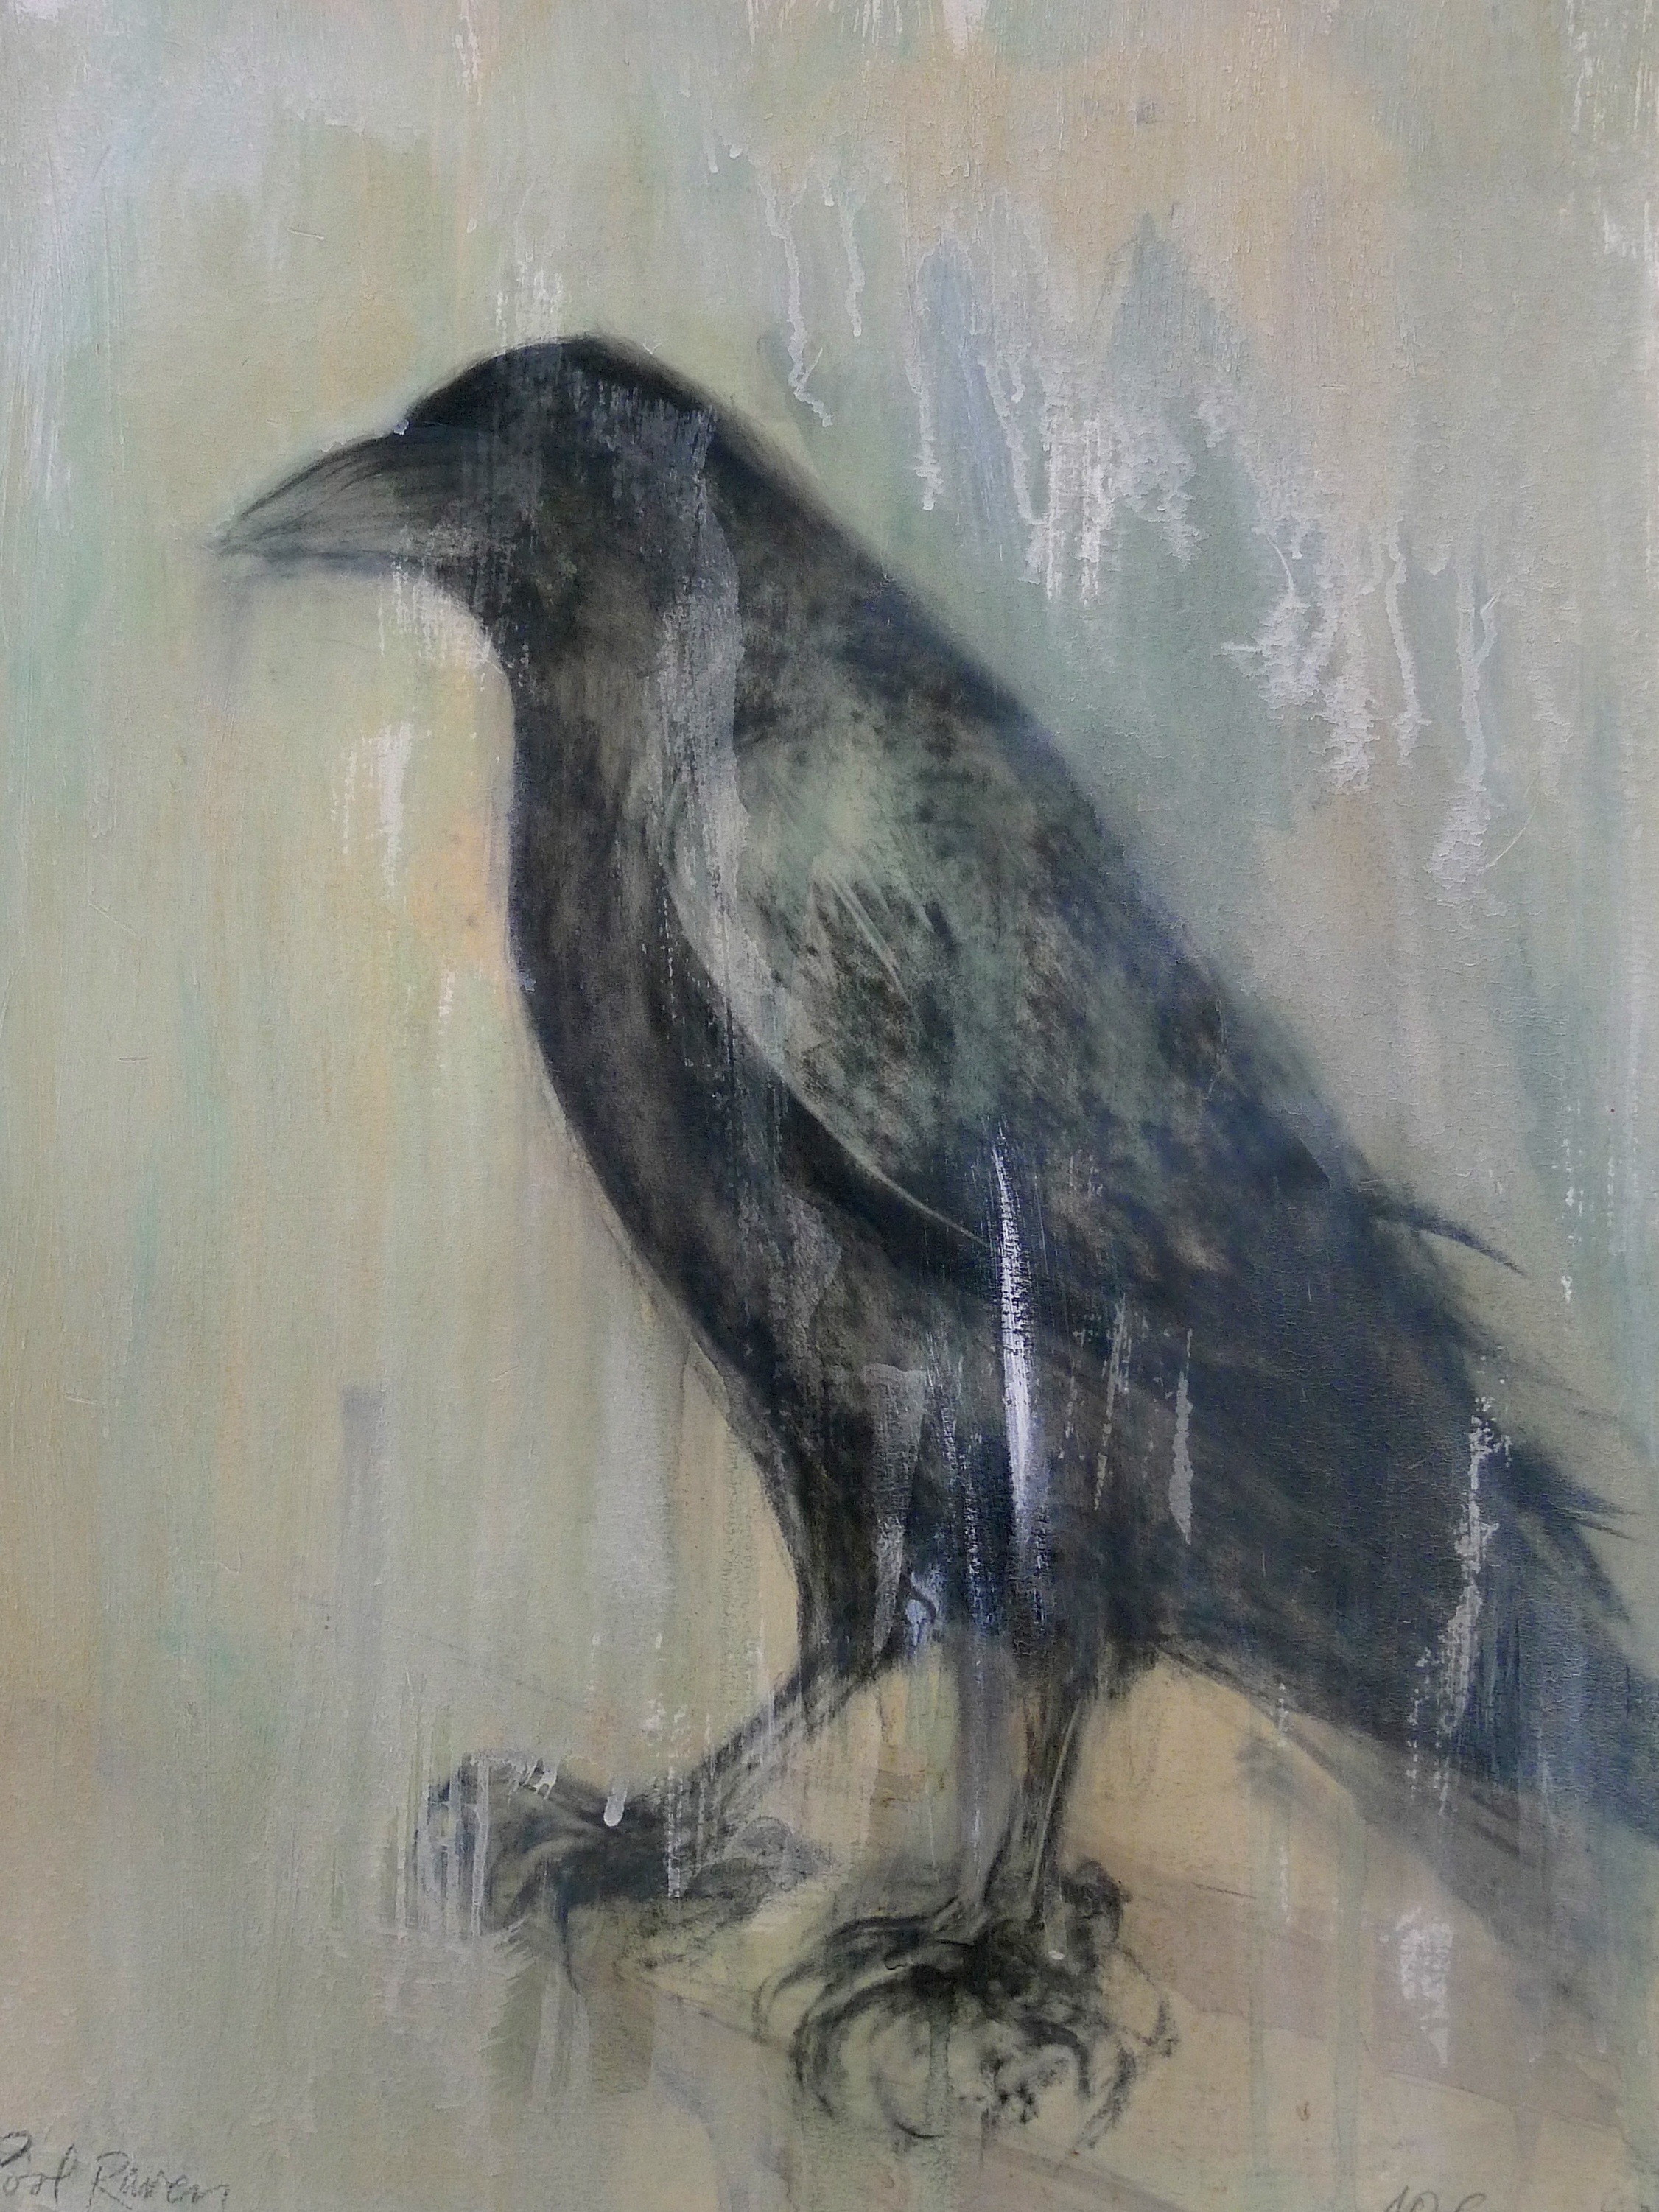  “Pool Raven,” 2013 Coffee, beeswax, and Korean watercolor on archival pigment print  20 x 16 inches  